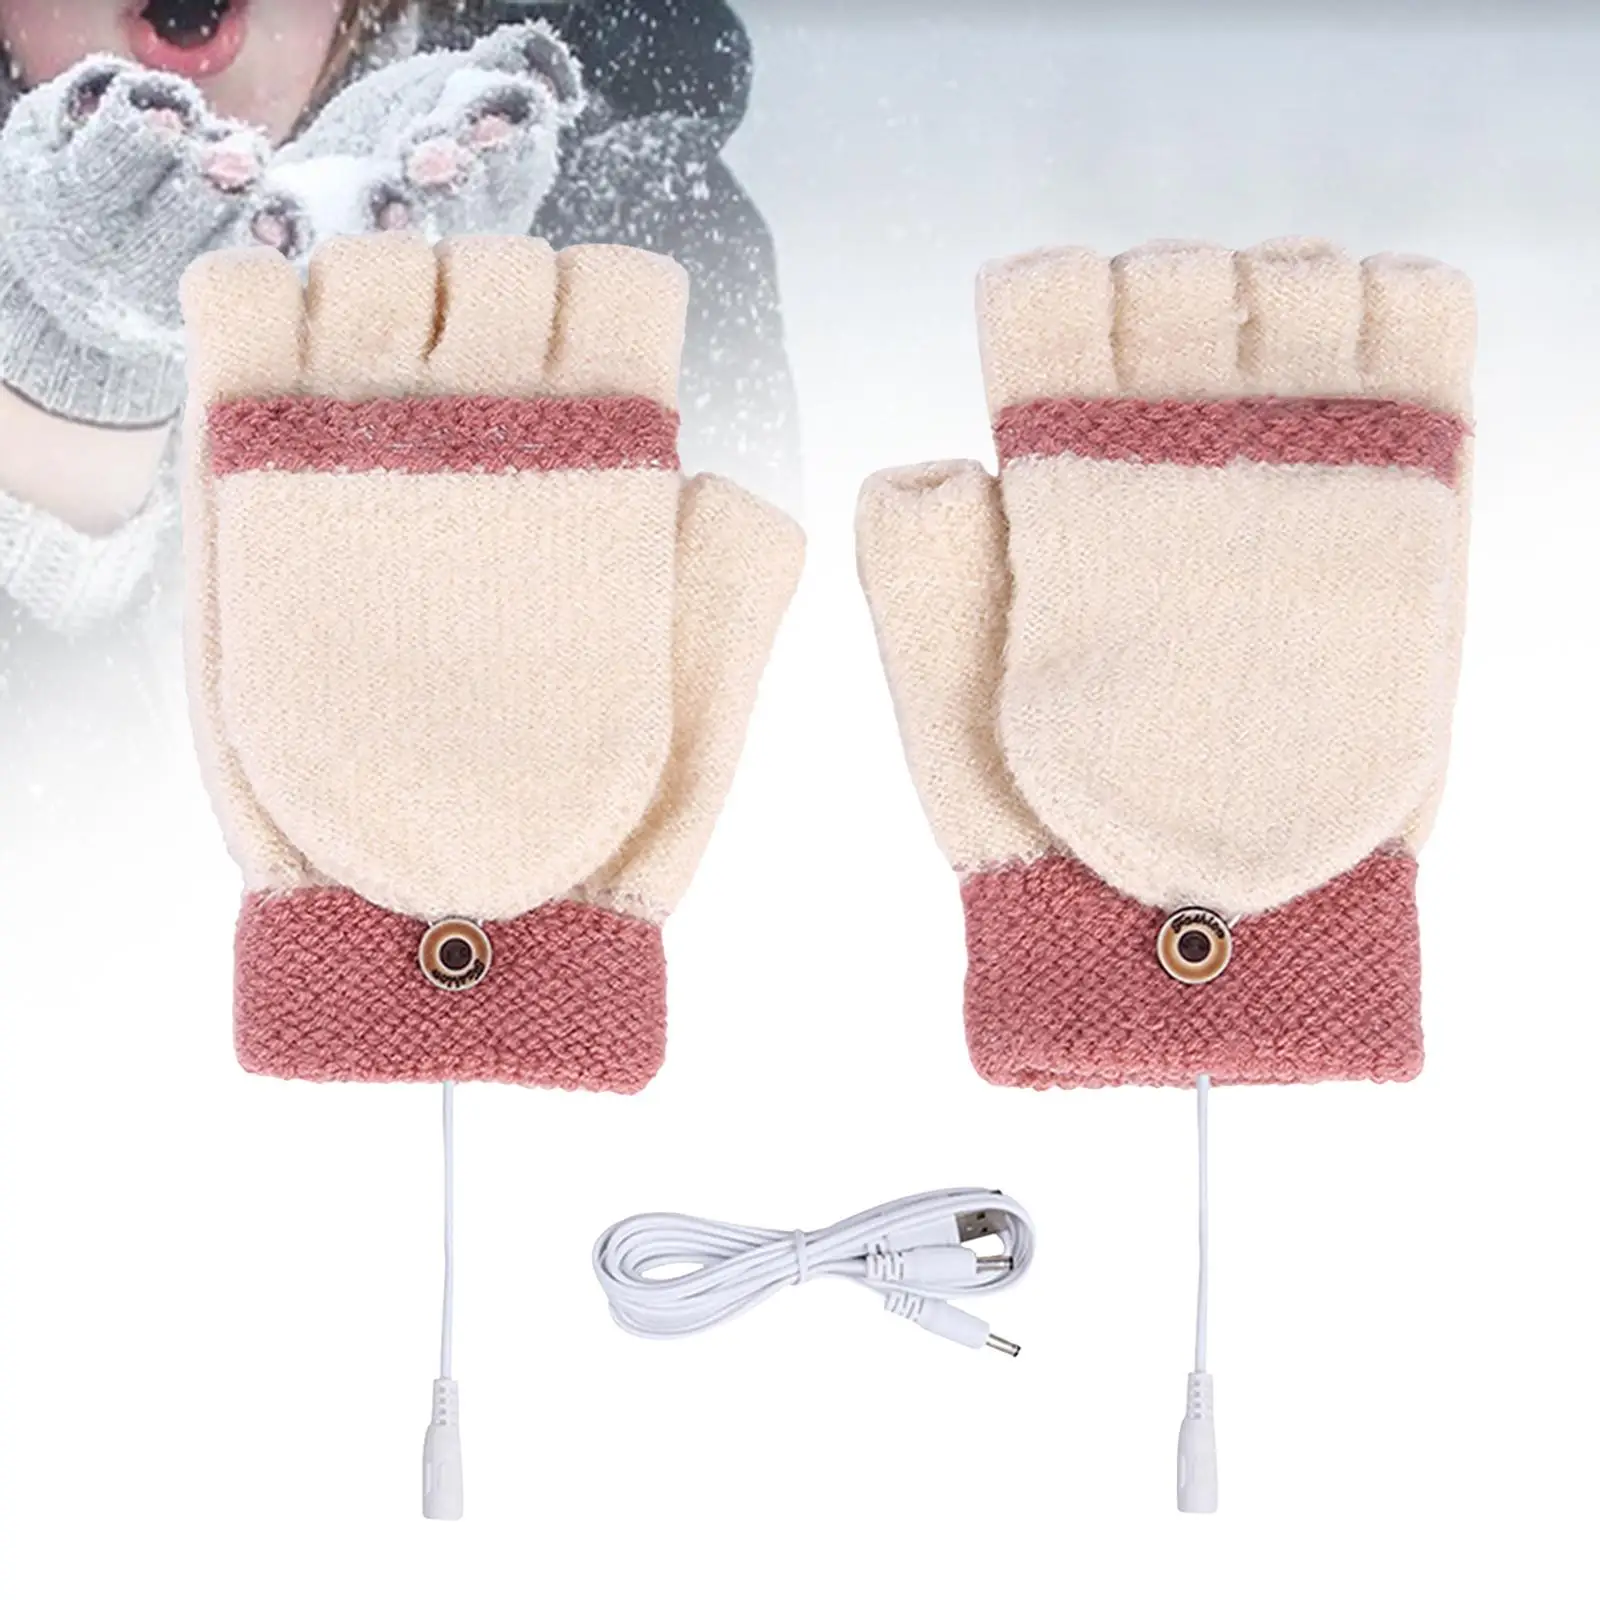 USB Heated Gloves Heating Gloves, Comfortable Outdoor for Women Hand Warmer for Skiing, Working Camping Snowboarding Cycling